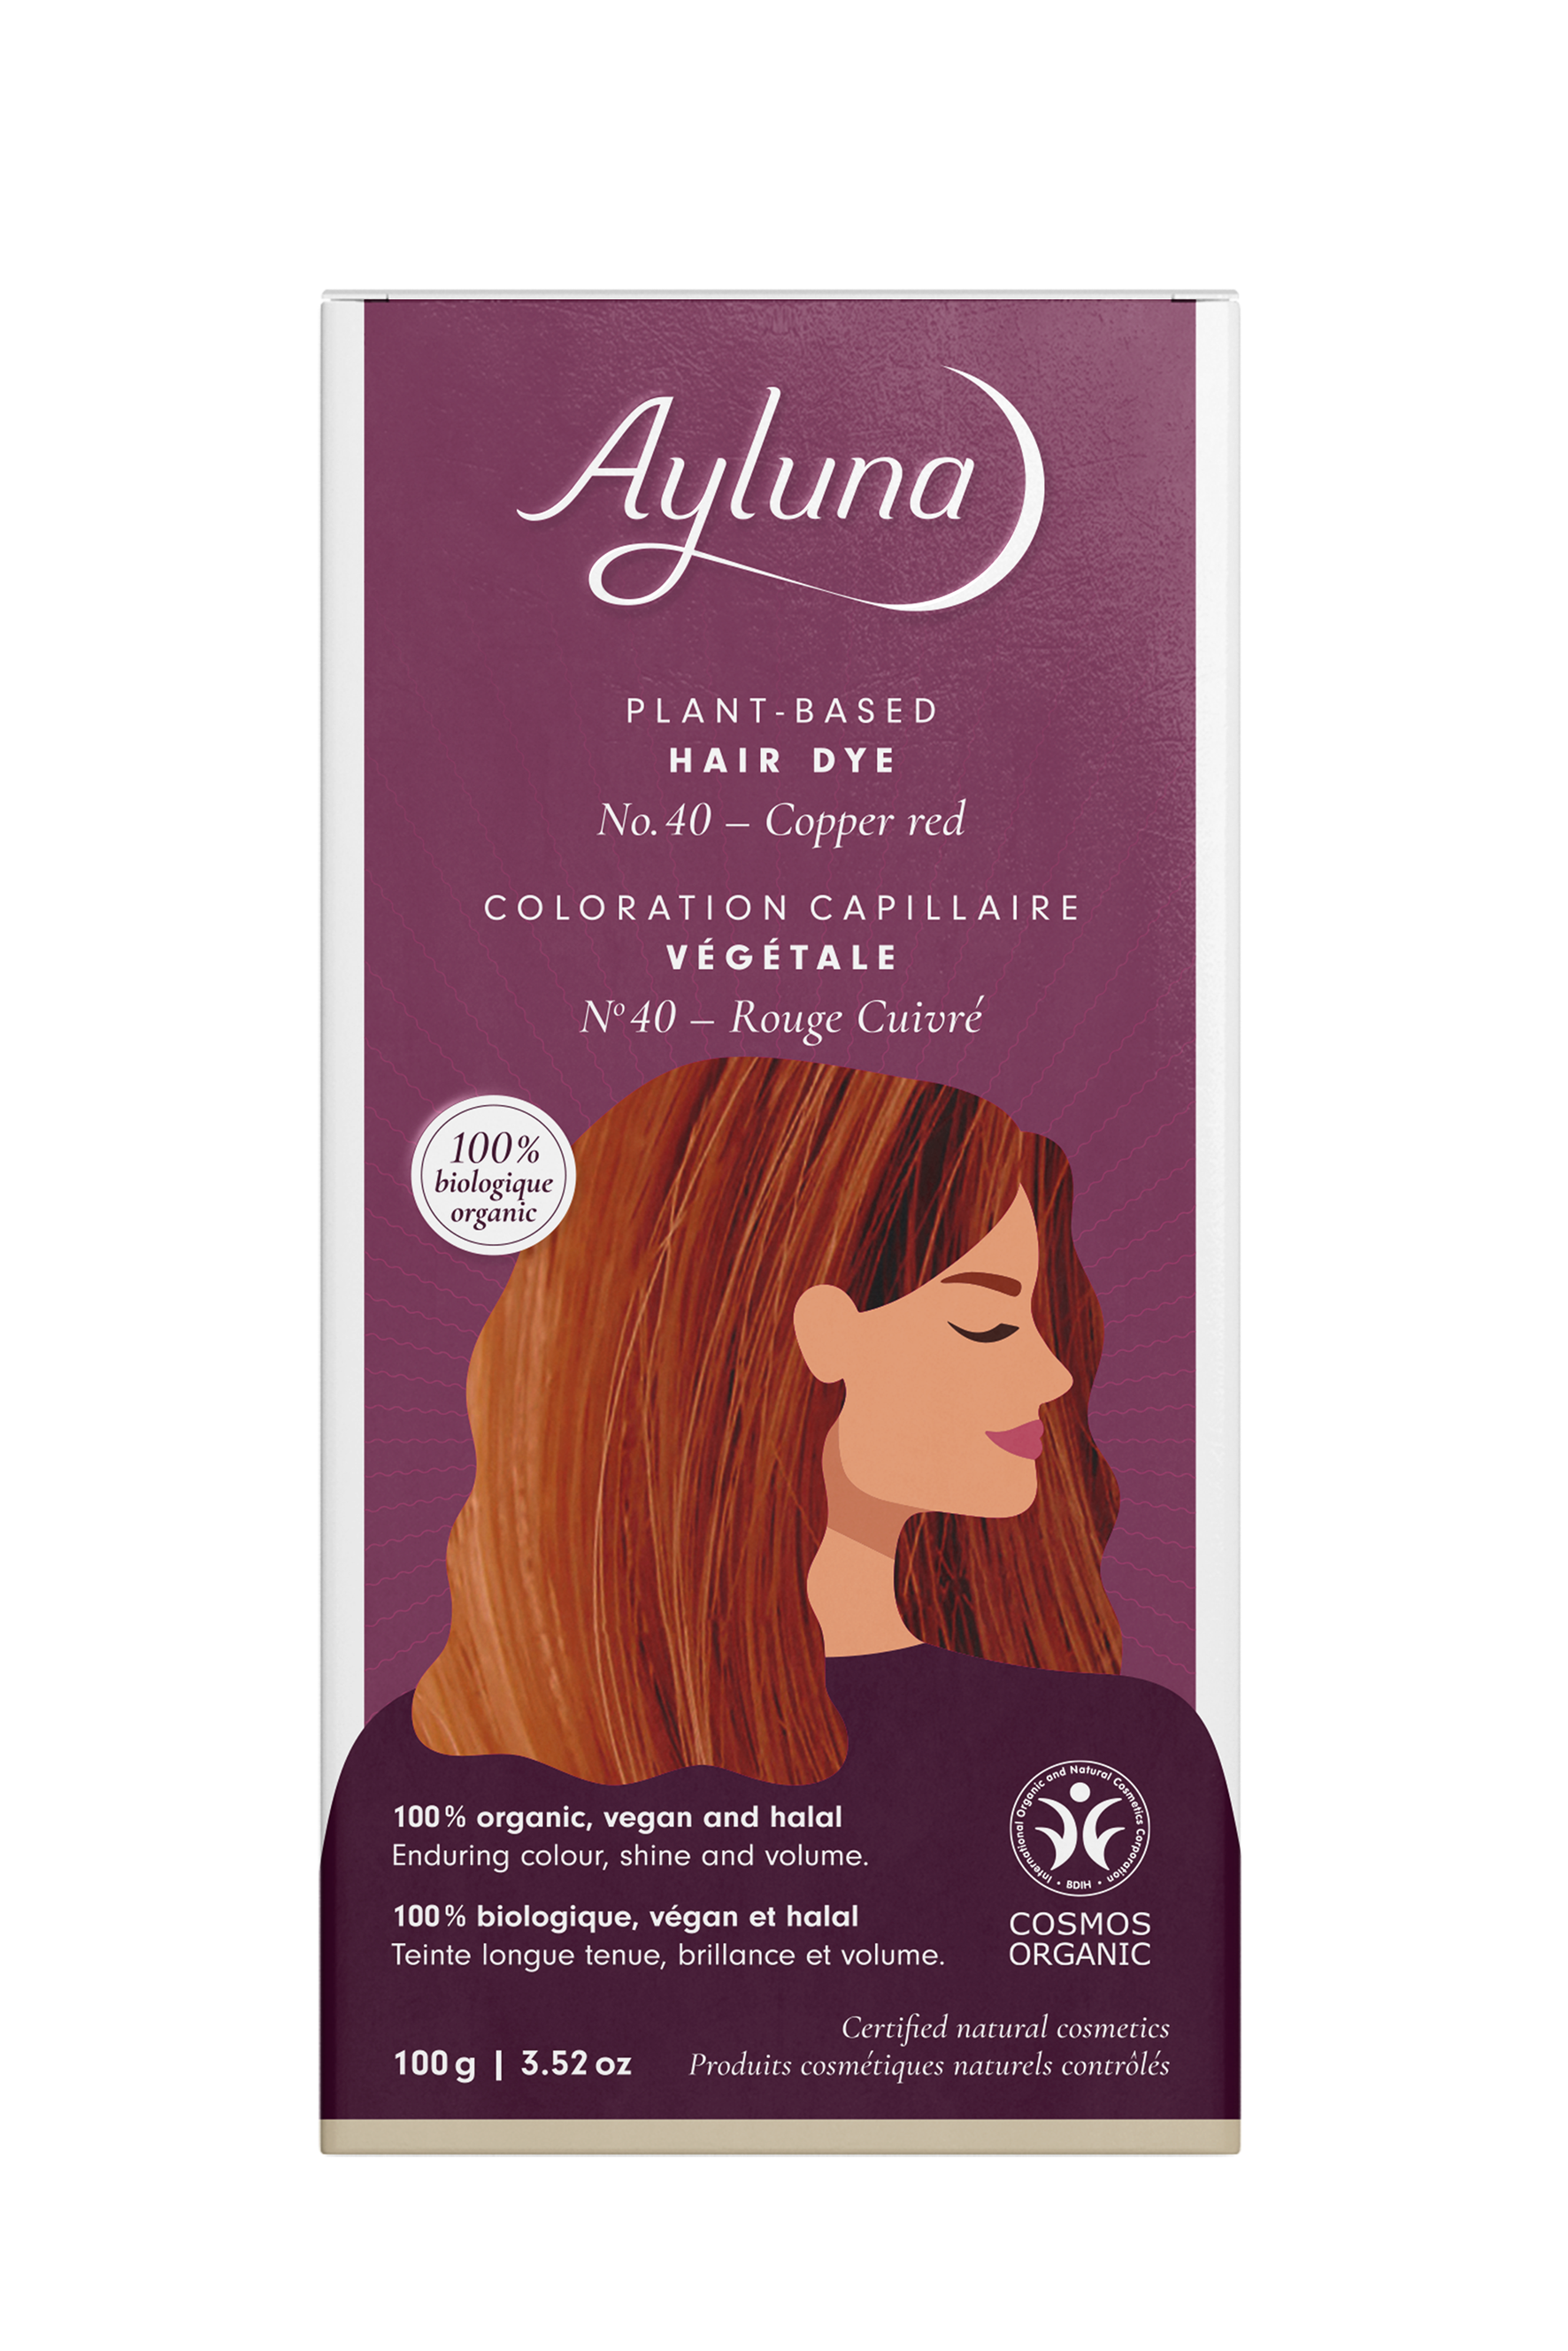 PLANT-BASED HAIR DYE NO. 40, COPPER RED